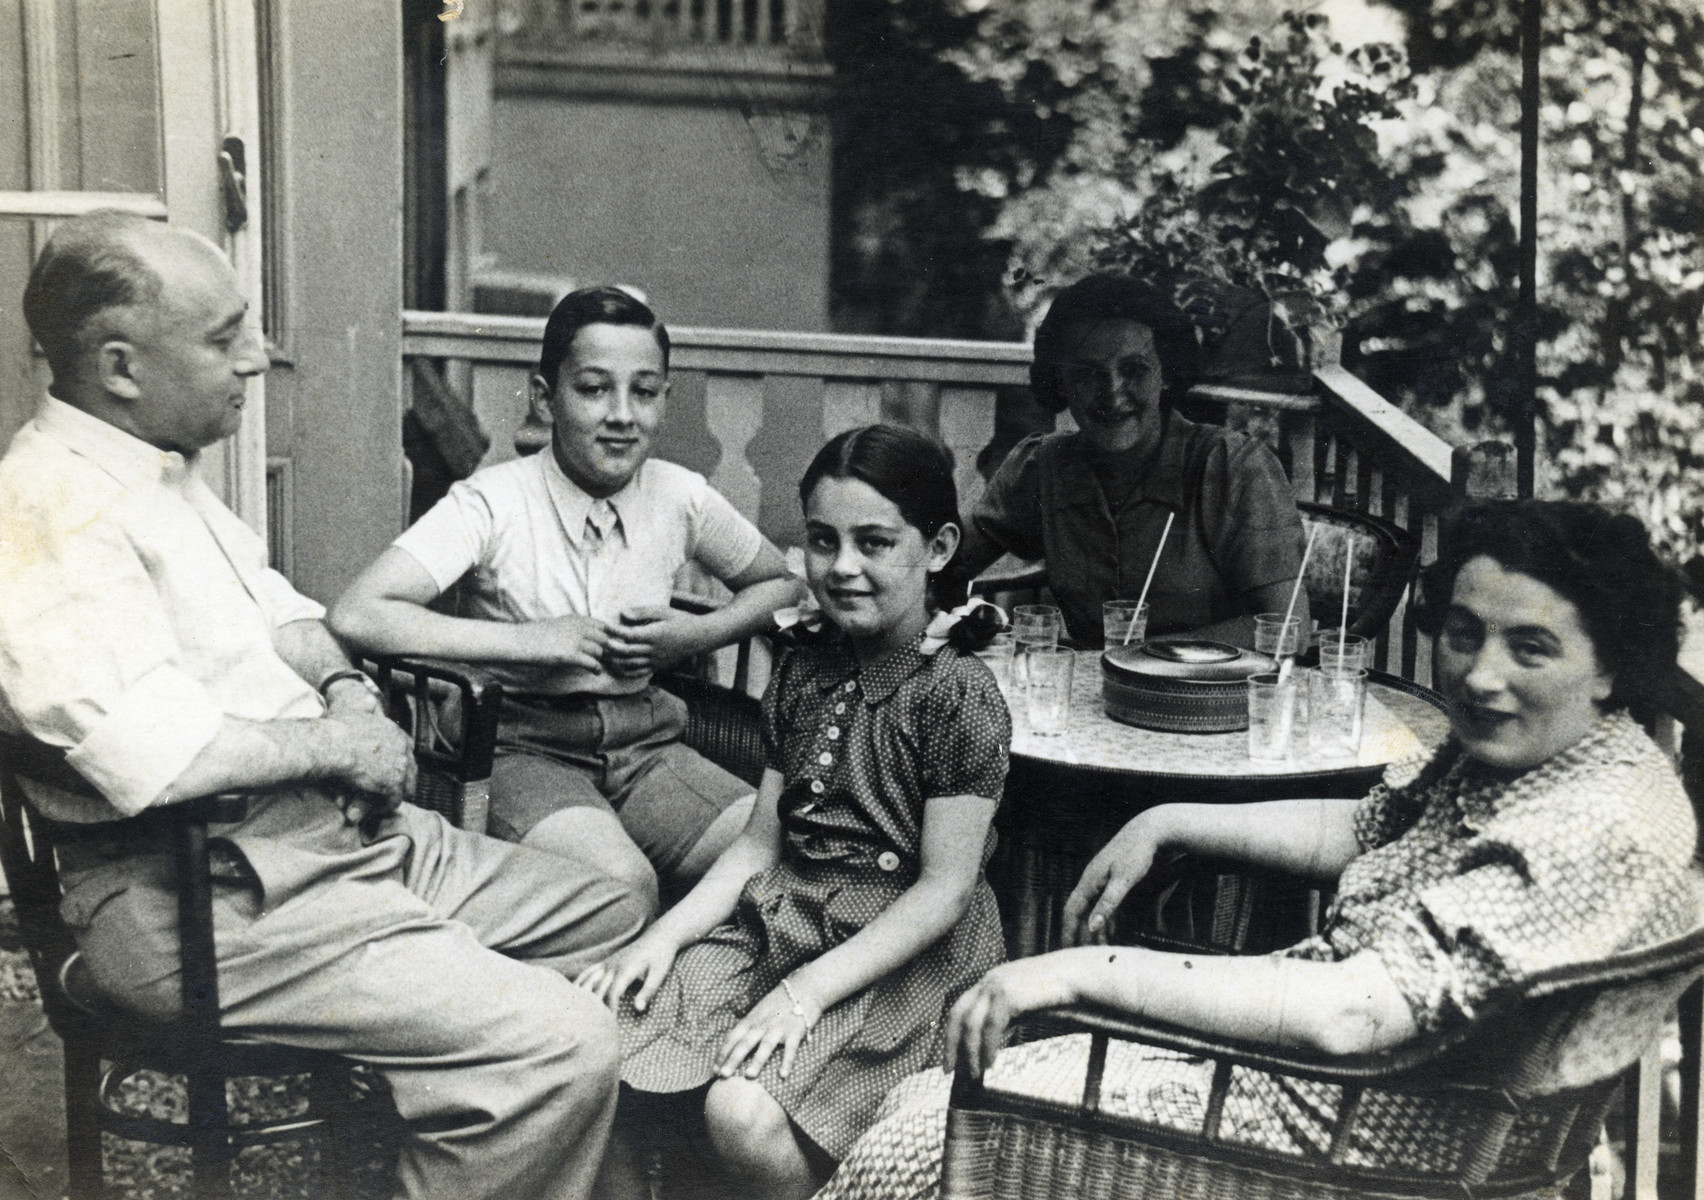 Isaak Krzywanowski sits on a porch with his wife and children.

From left to right are Isaak, Jacob, Rebecca and Sara Krzywanowsk.  Seated in the background is Isaak's sister, Bronia Krzywanowski.  She was born in Plonsk, Poland in 1902 and  survived the war in hiding in Amsterdam. In 1949, she immigrated to Israel, and settled in Tel Aviv.